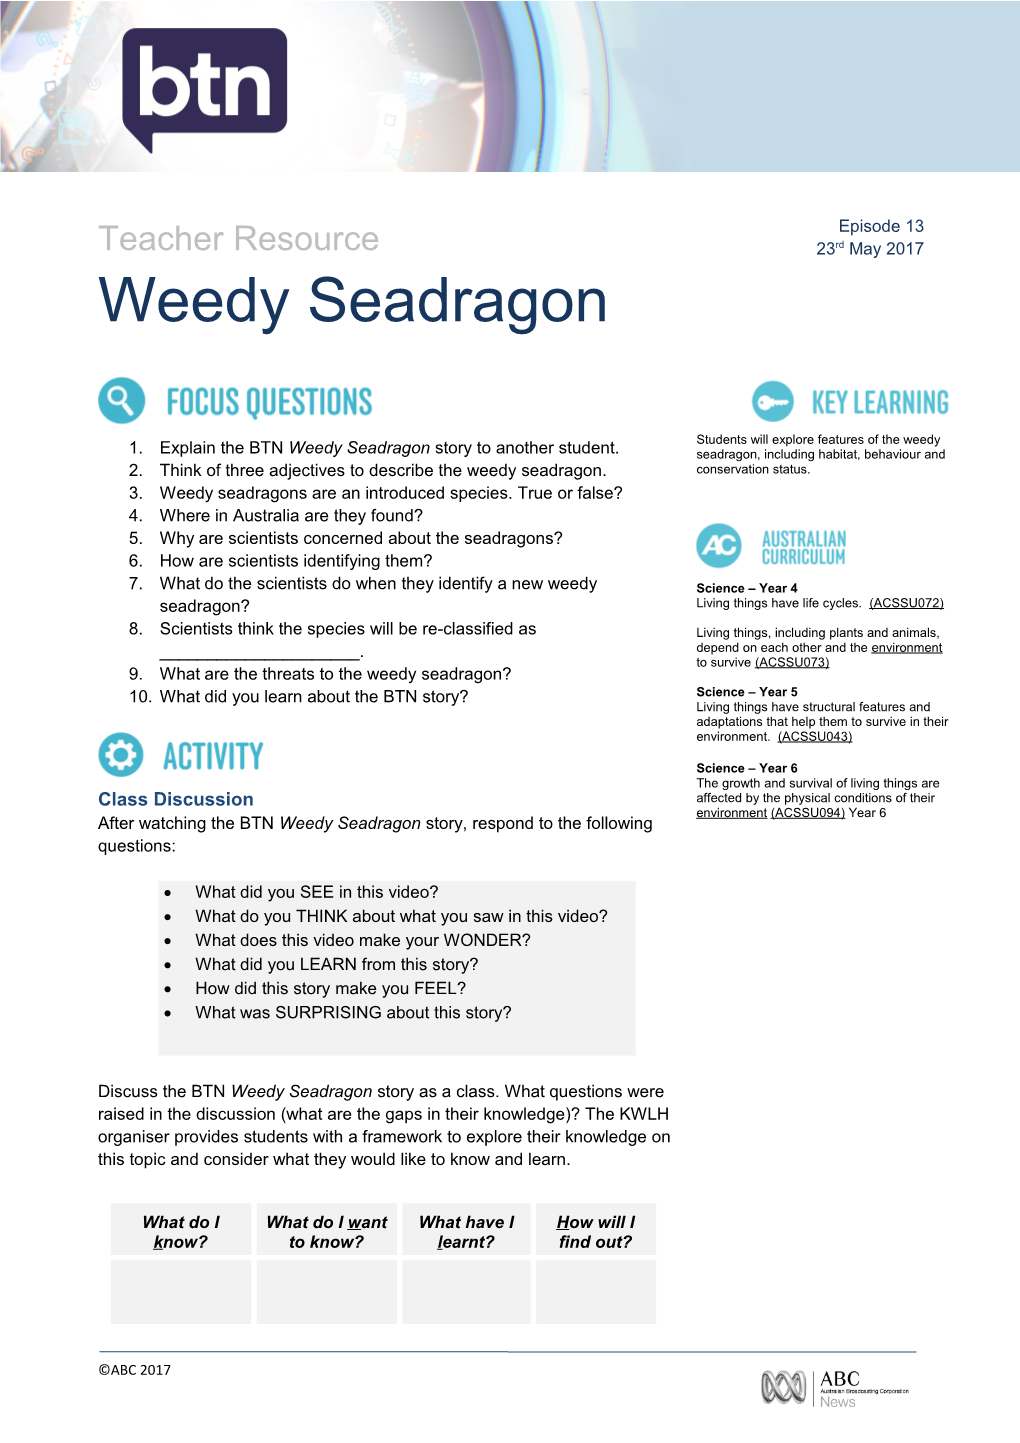 1. Explain the BTN Weedy Seadragon Story to Another Student